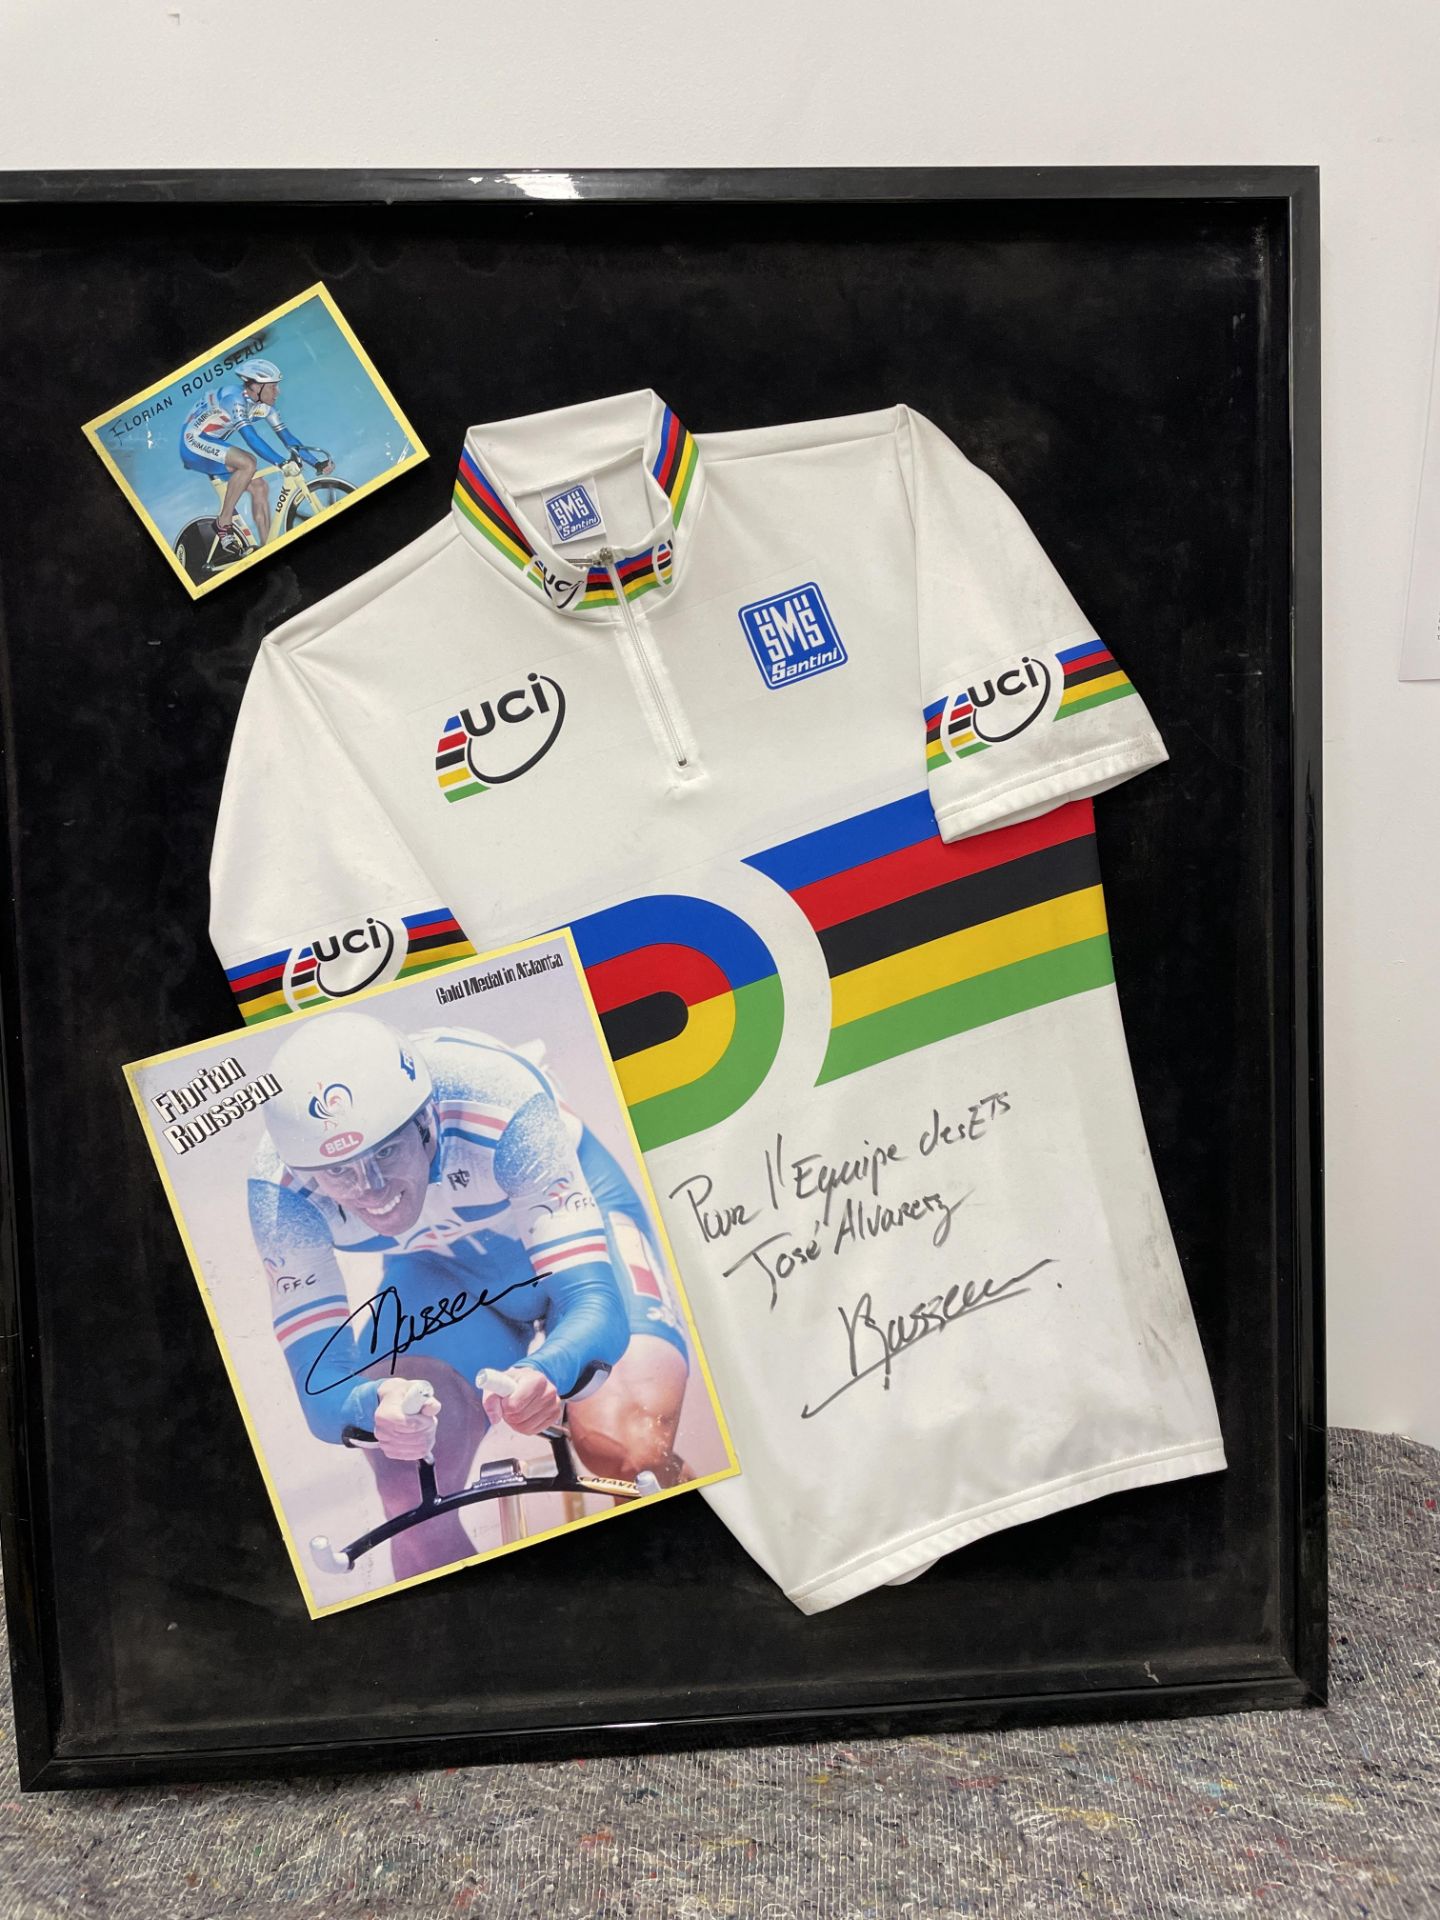 Florian Rousseau Framed & Signed UCI Track Cycling World Championship Jersey. Olympic Track Cycling